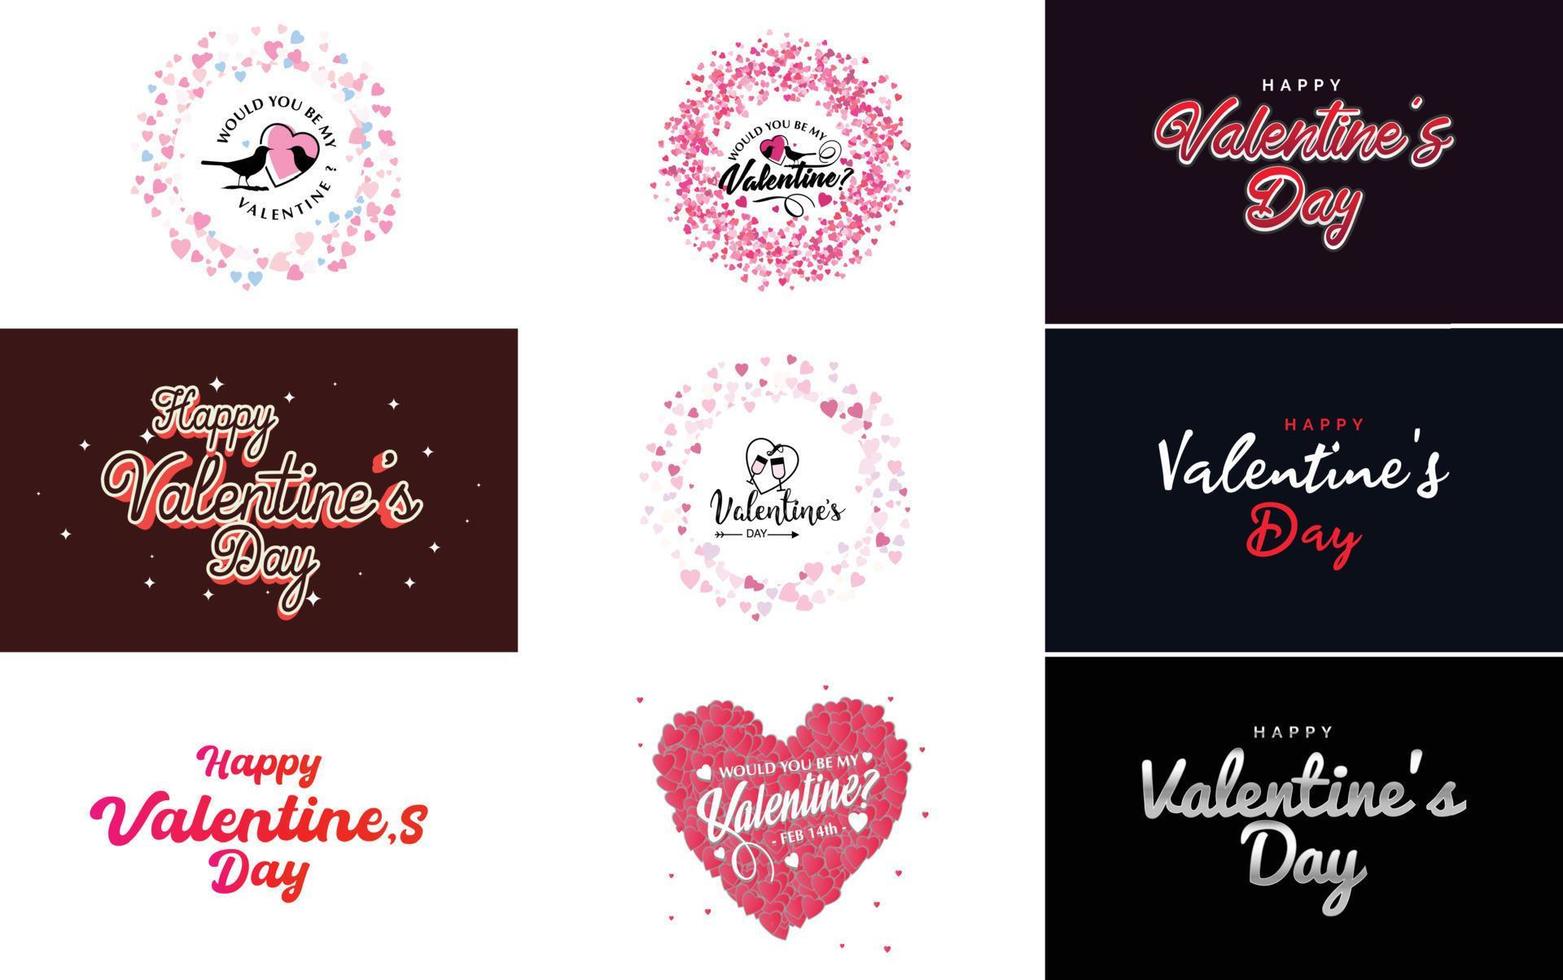 Happy Valentine's Day typography design with a heart-shaped theme vector